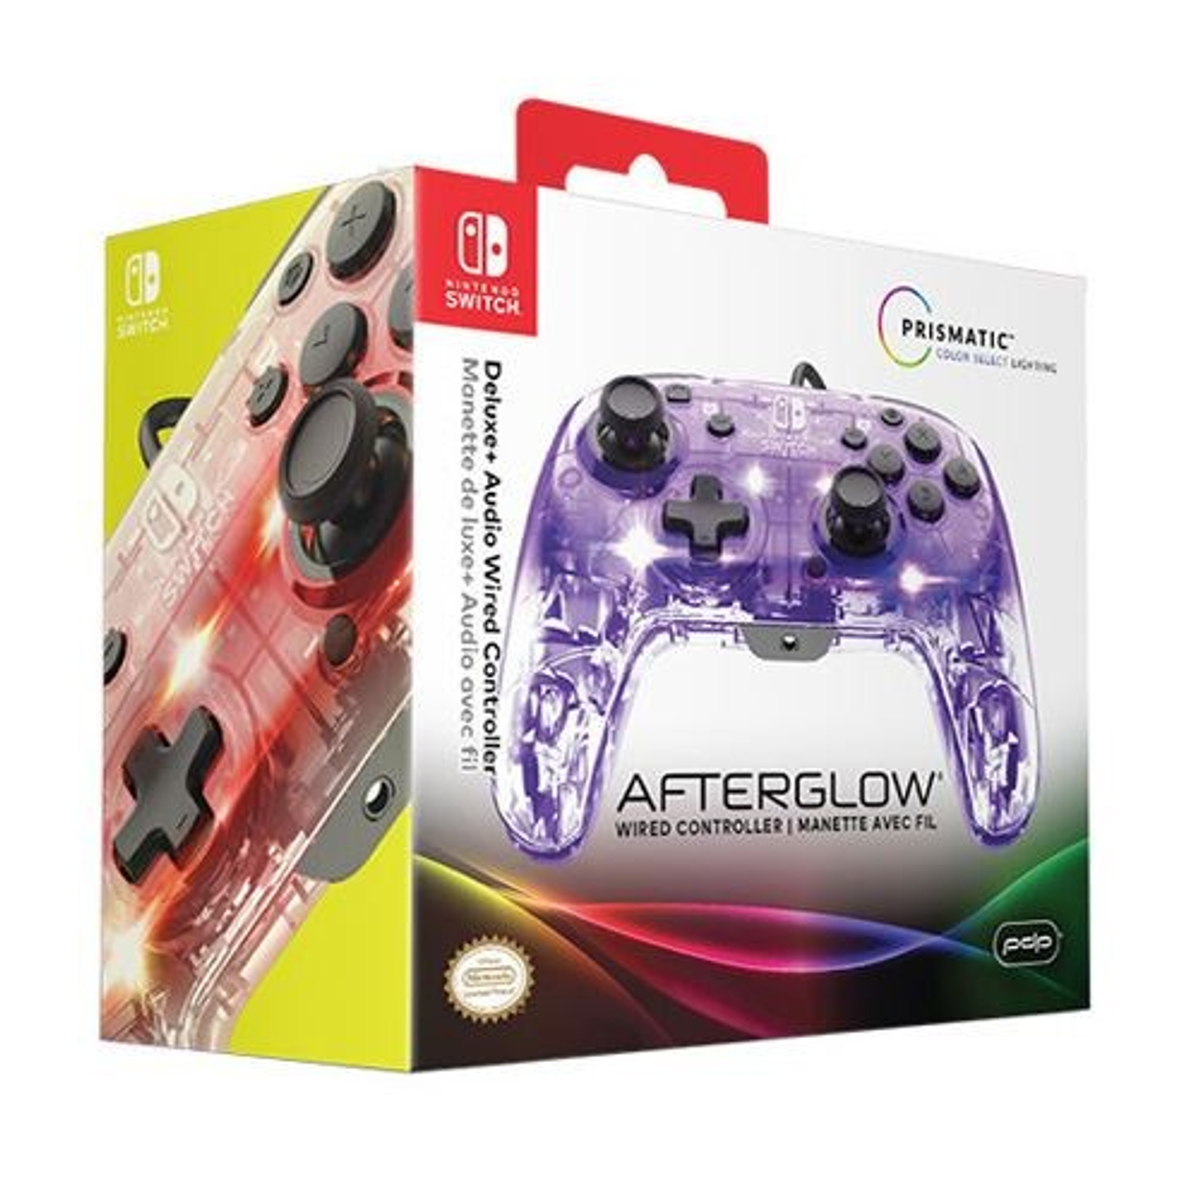 AFTERGLOW CONTROLLER AUDIO PDP 500-132-EU WIRED Controller DELUXE Durchsichtig